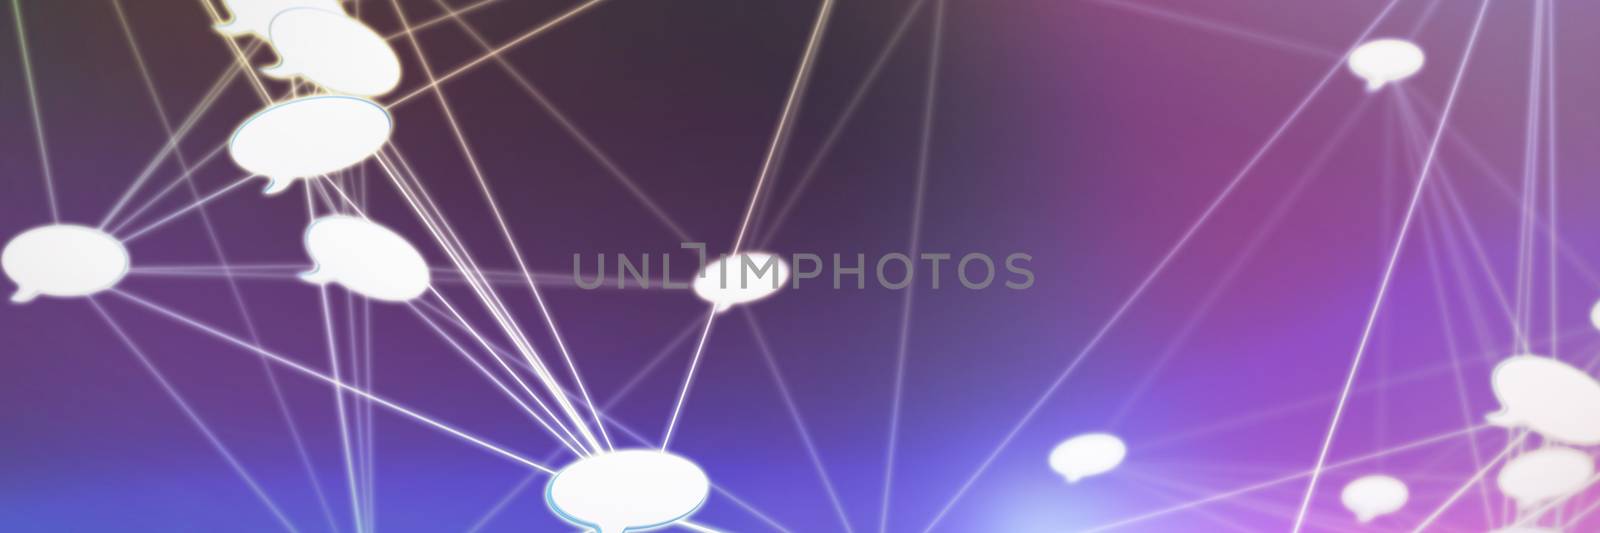 Abstract image of speech bubble against purple and pink background